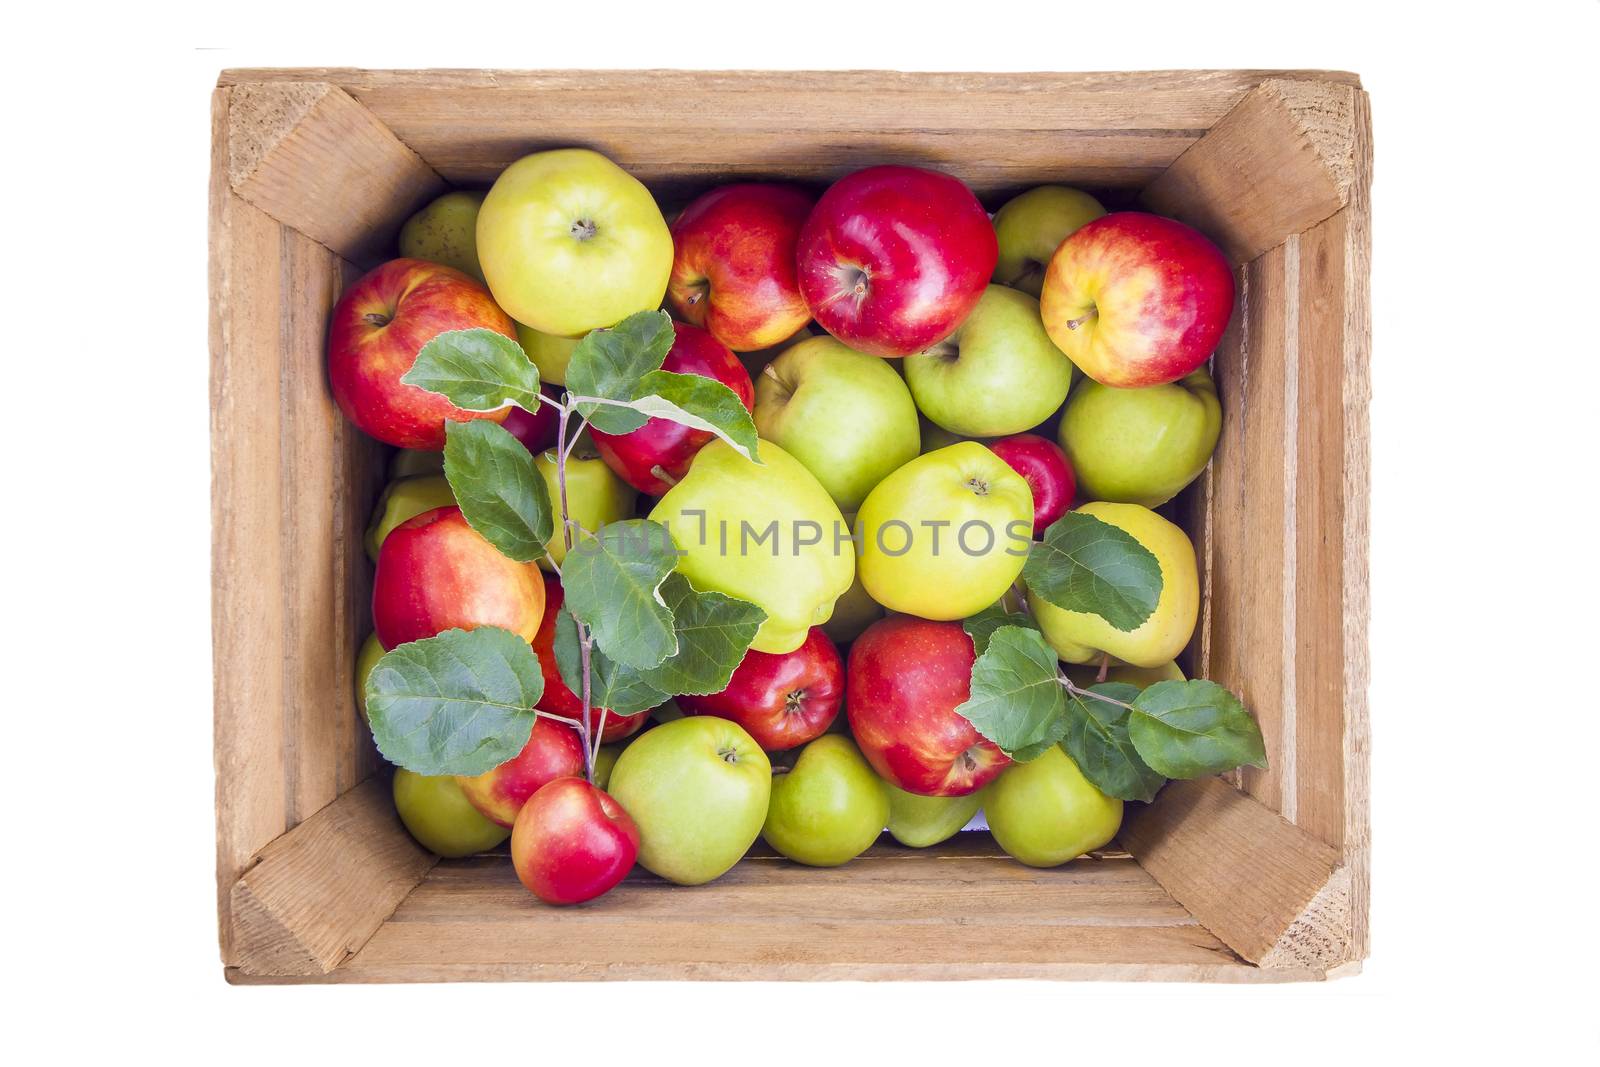 Red and green apples in wooden box by Gbuglok